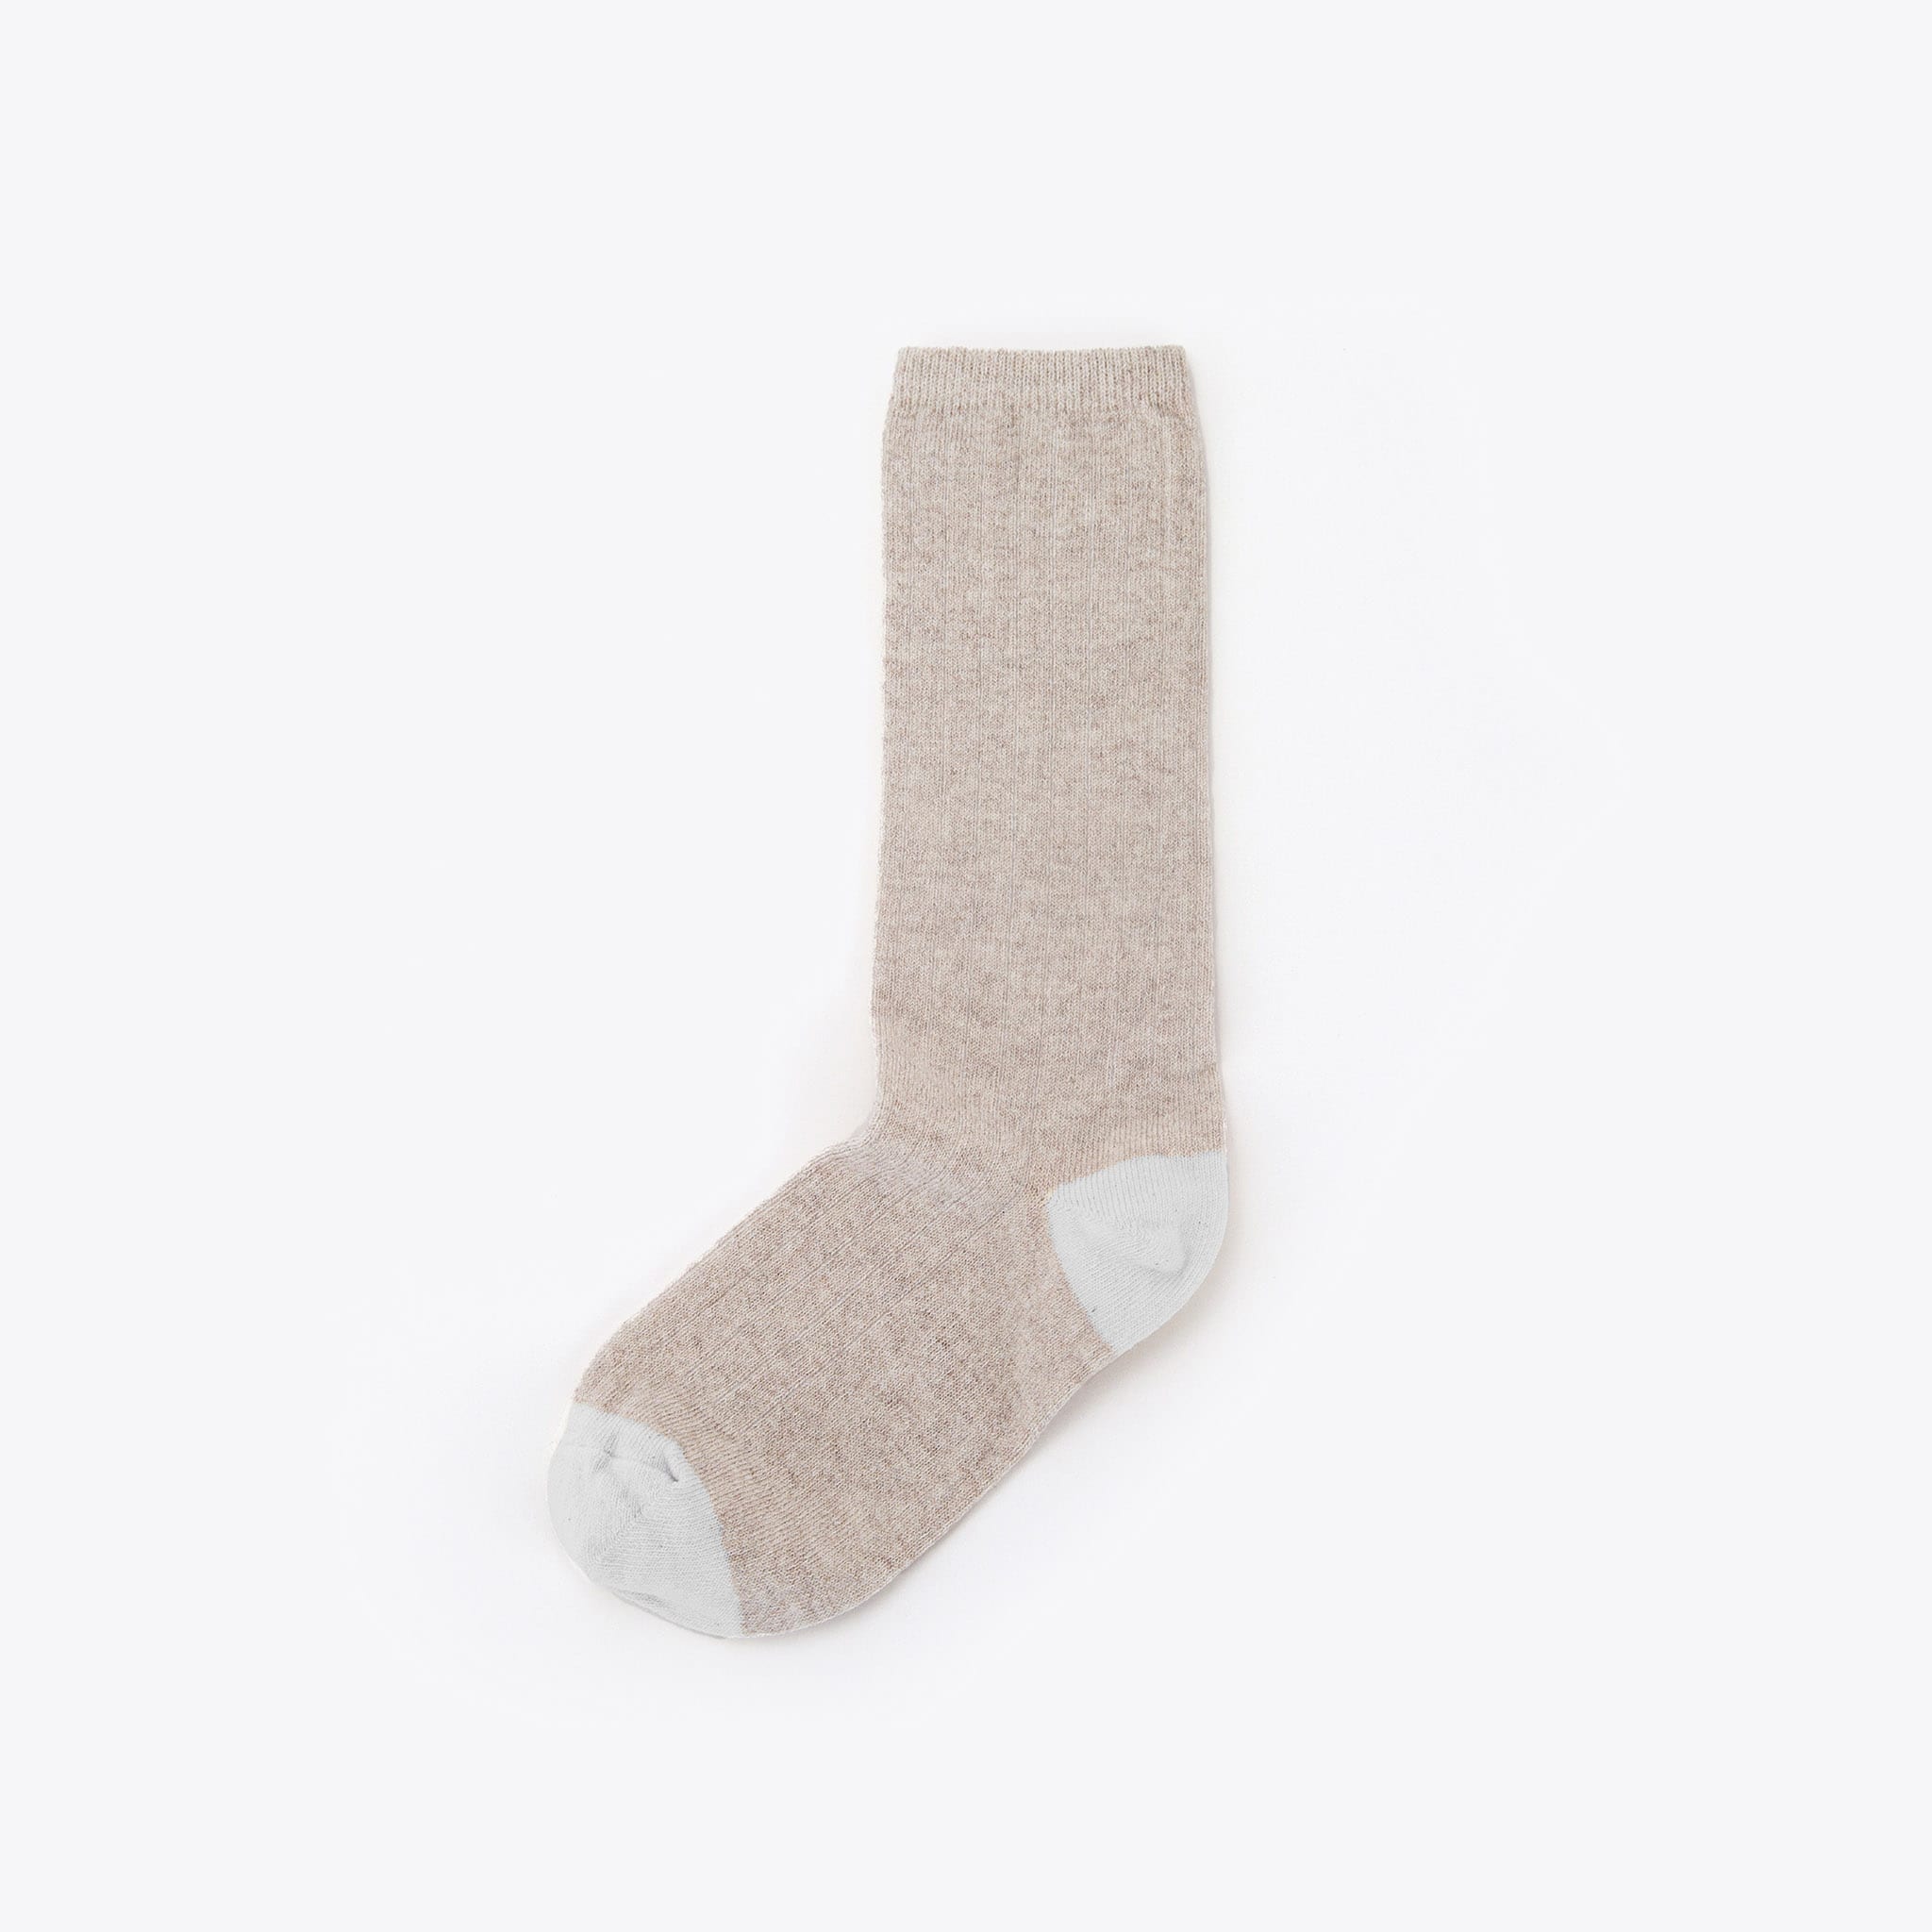 Nisolo Cotton Crew Sock Tan/White - Every Nisolo product is built on the foundation of comfort, function, and design. 